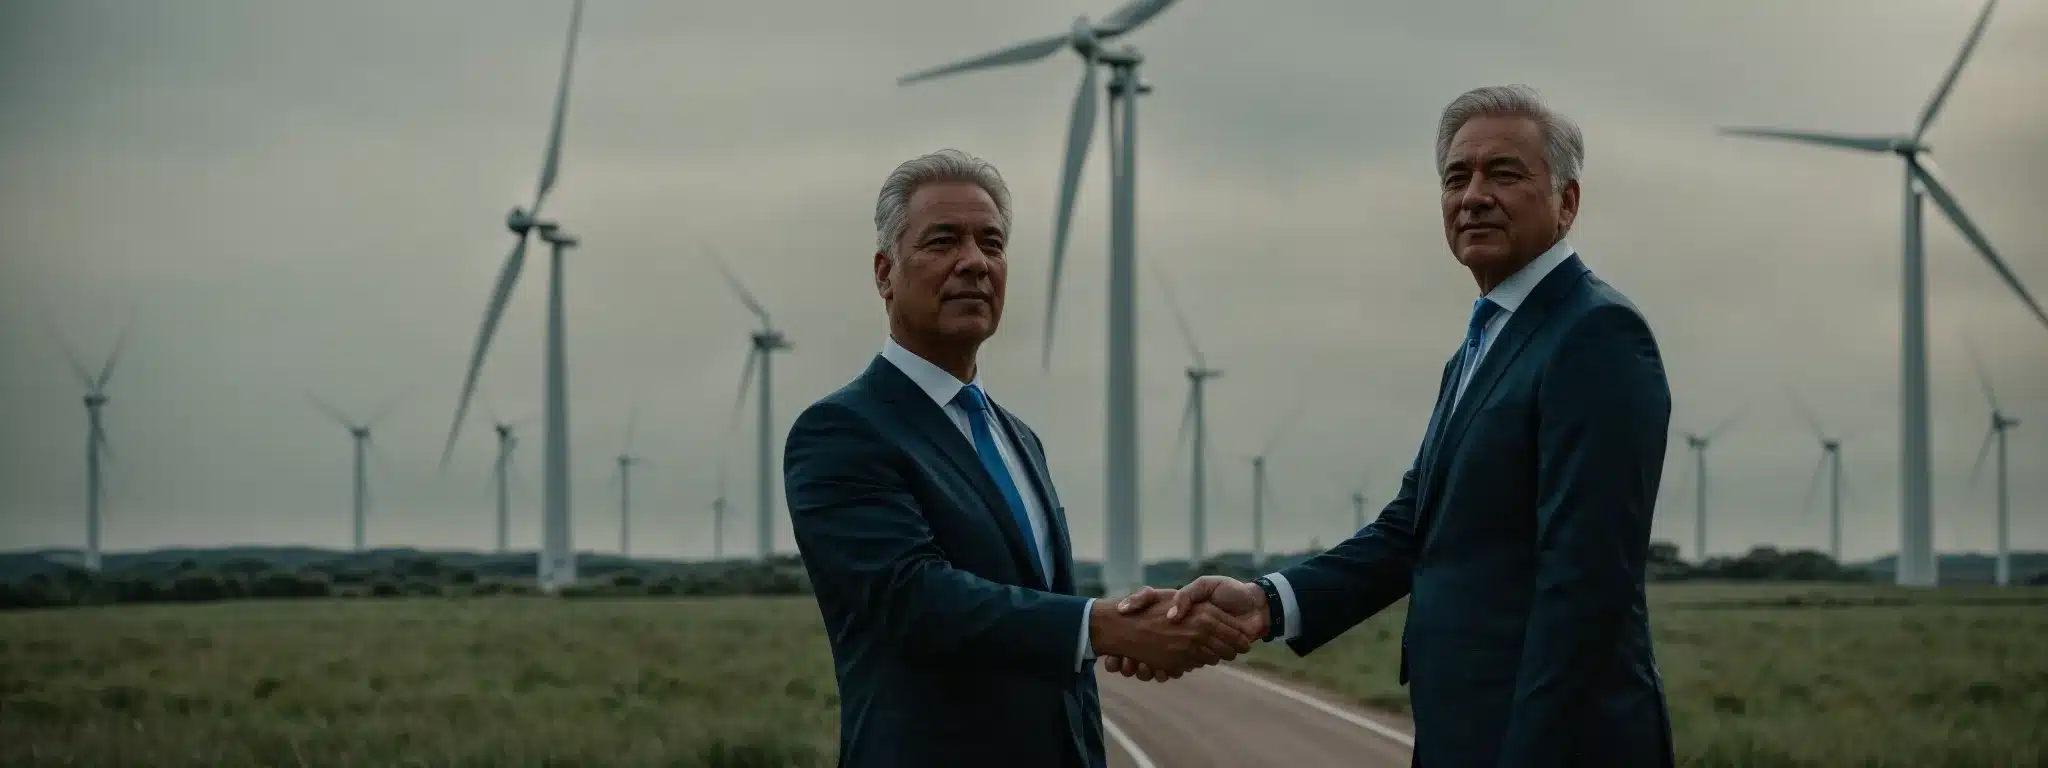 Two Business Leaders Shaking Hands In Front Of A Wind Farm, Symbolizing A Partnership For Sustainable Development.